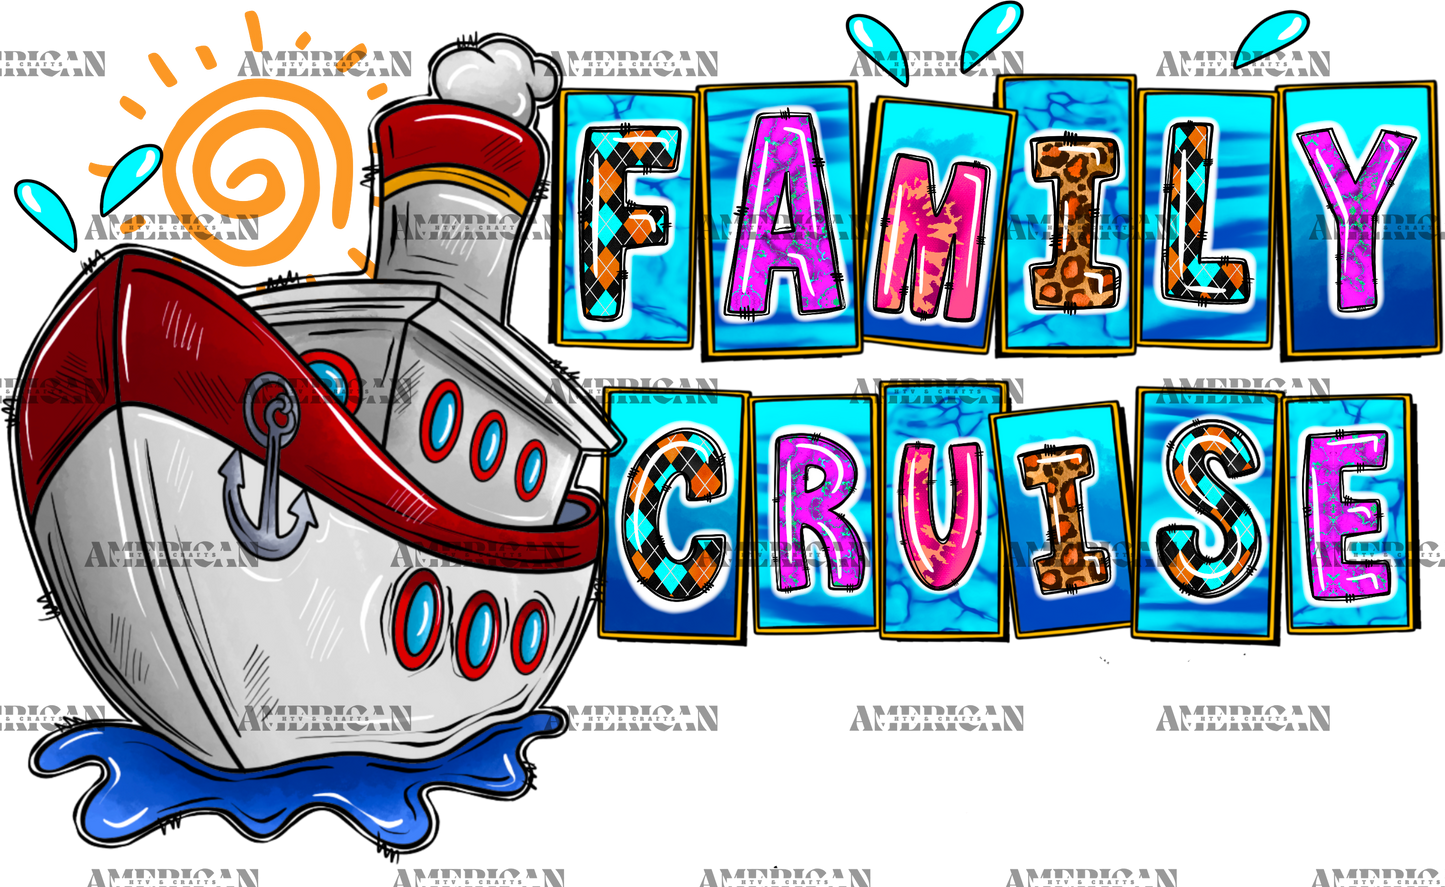 Family Cruise DTF Transfer